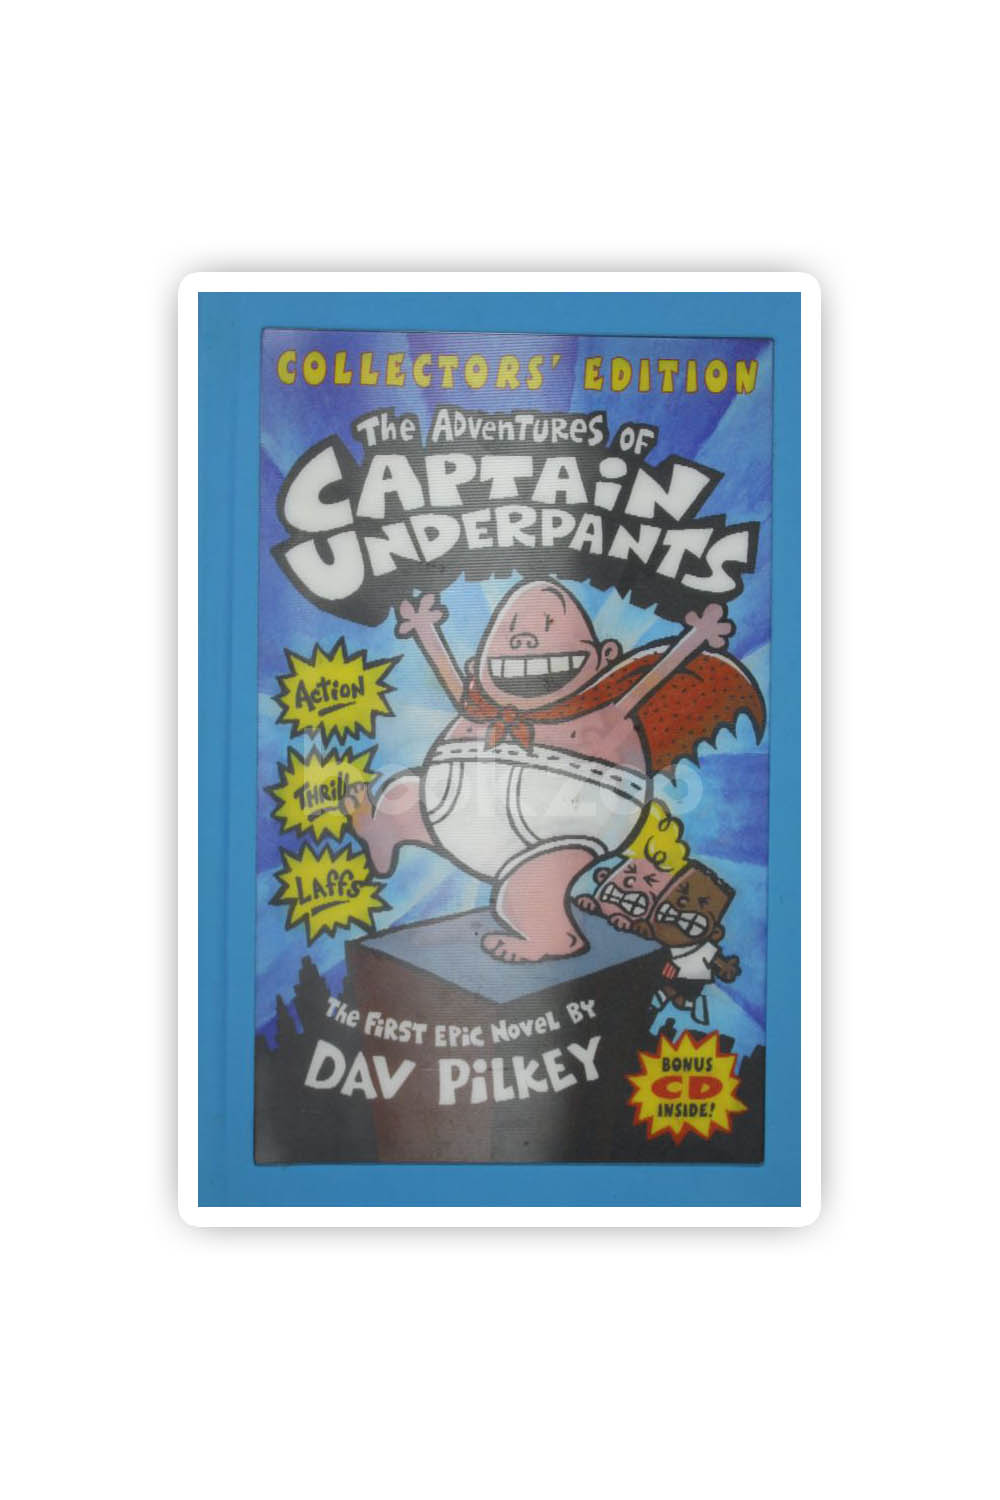 The Adventures of Captain Underpants (Collectors' Edition with